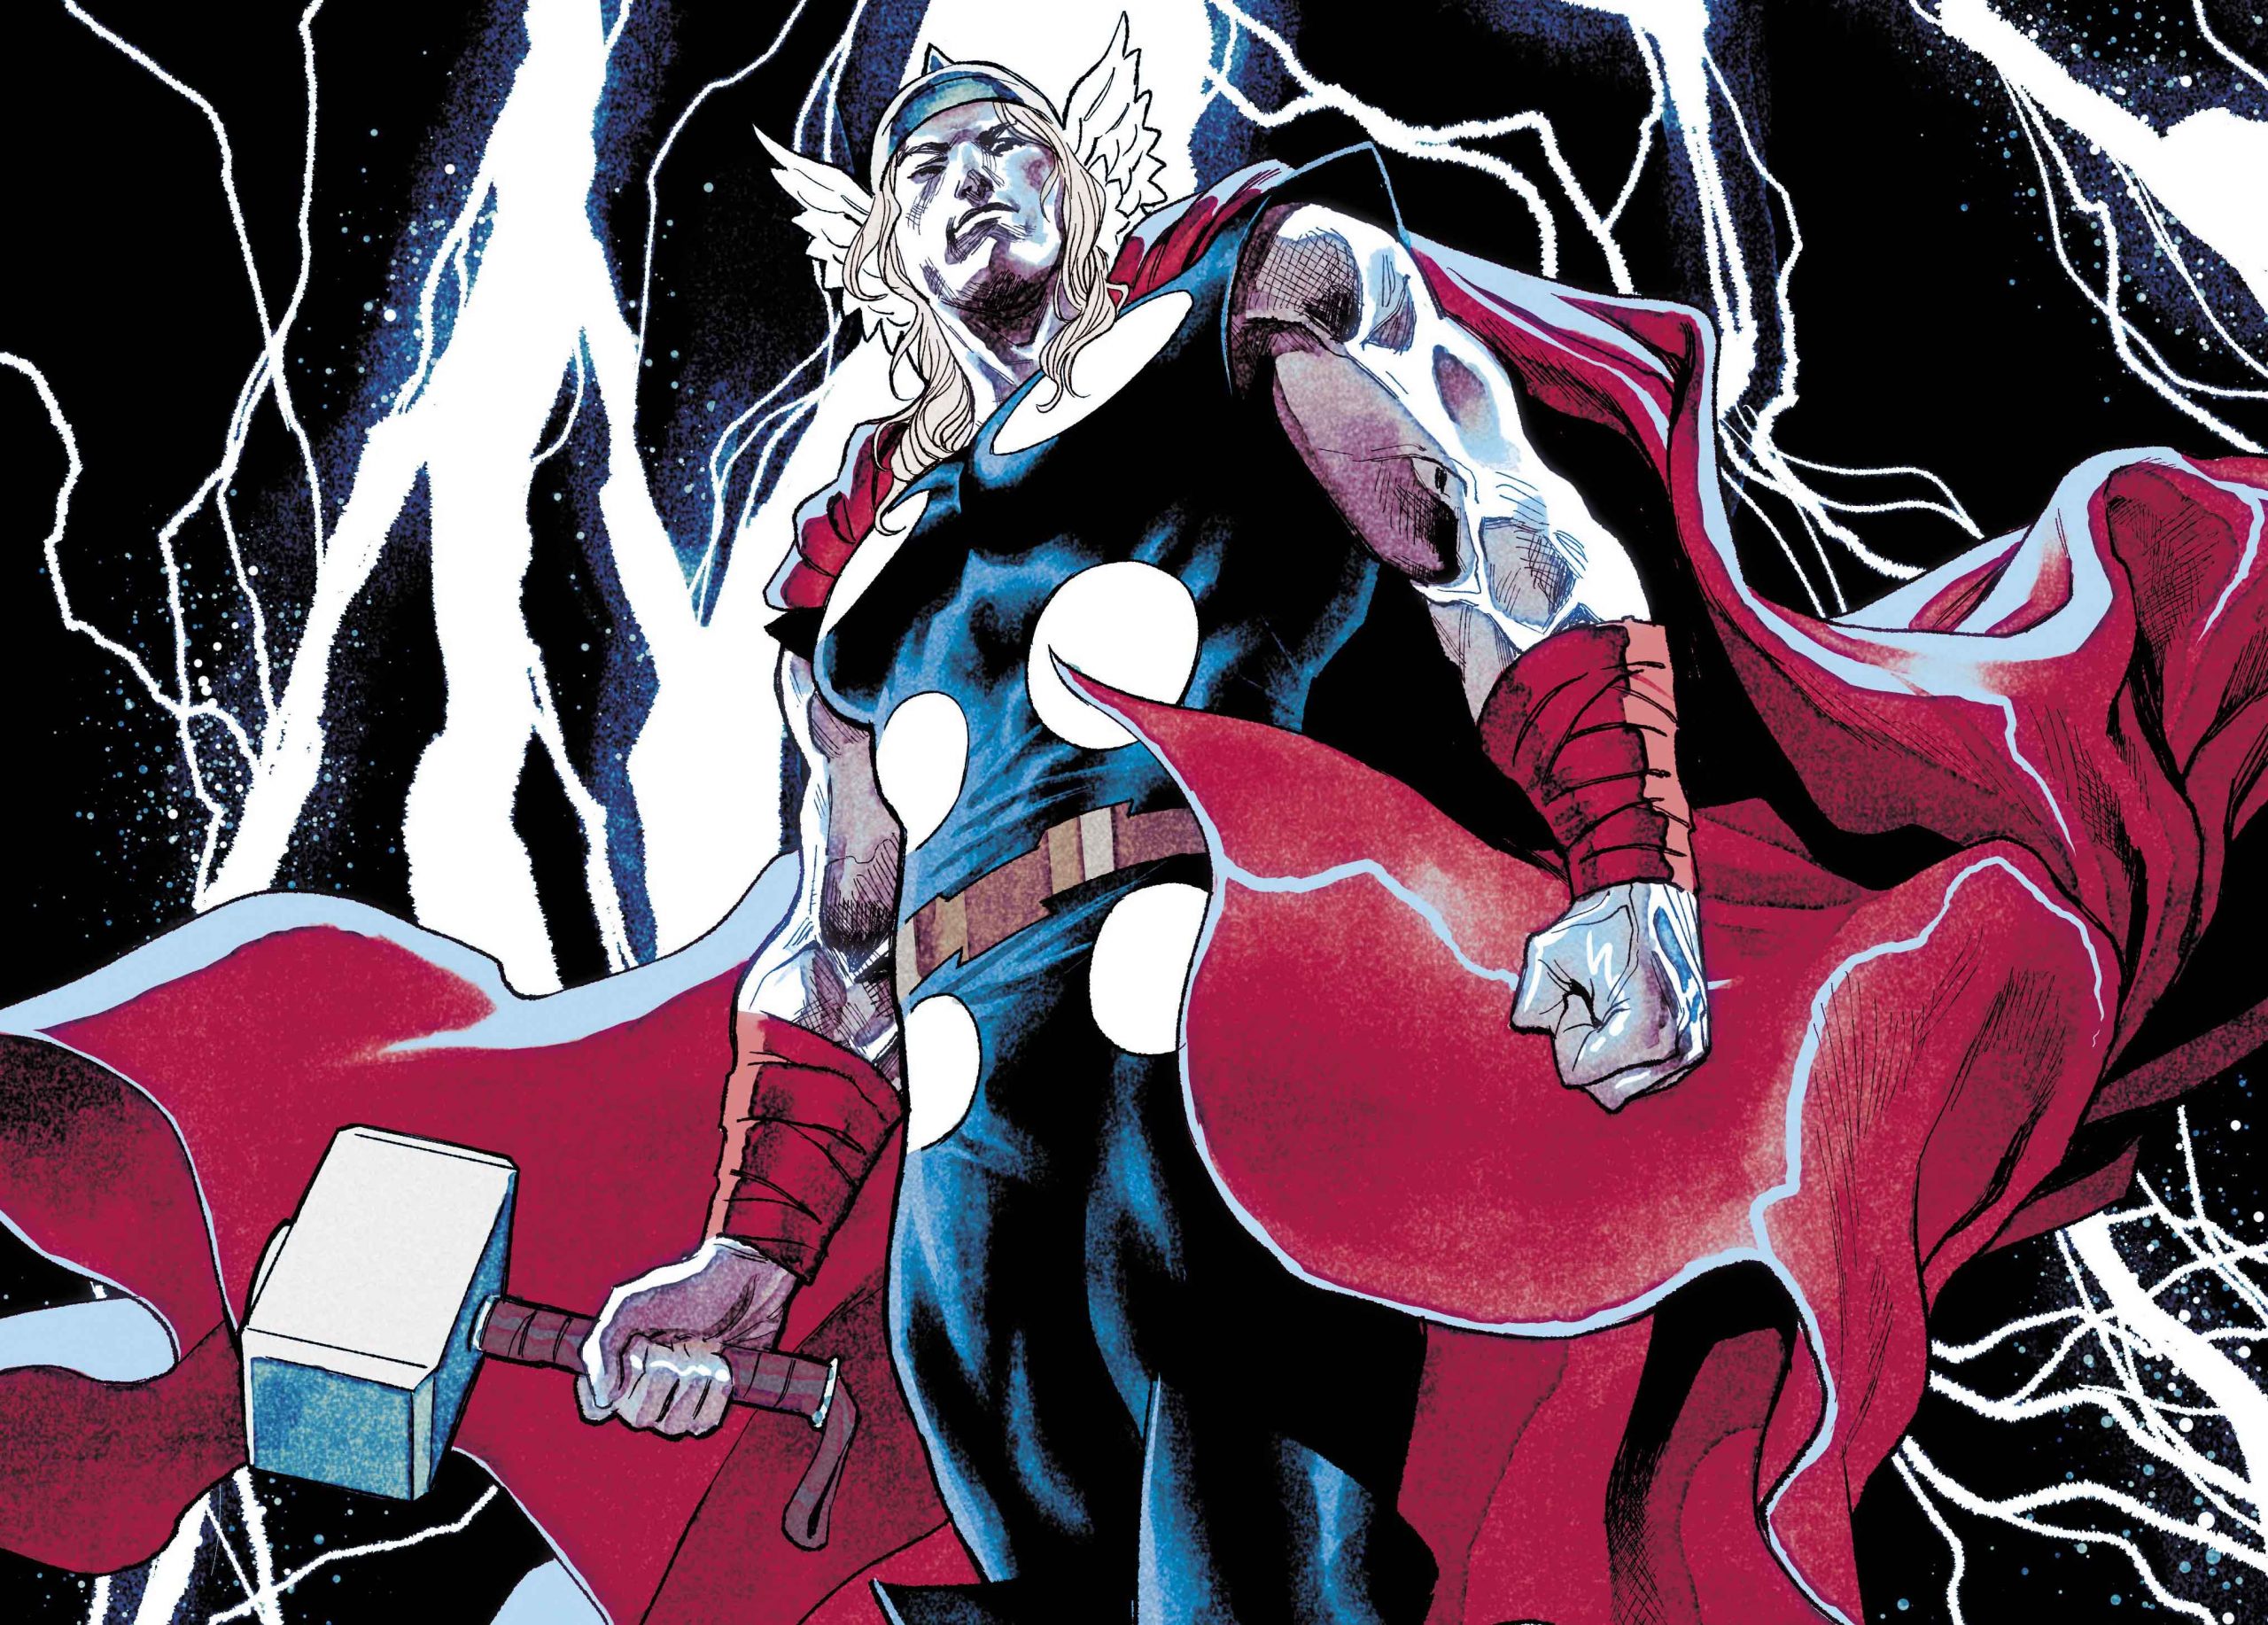 Foil Variant Covers for 'Immortal Thor' and 'Star Wars: Dark Droids' announced